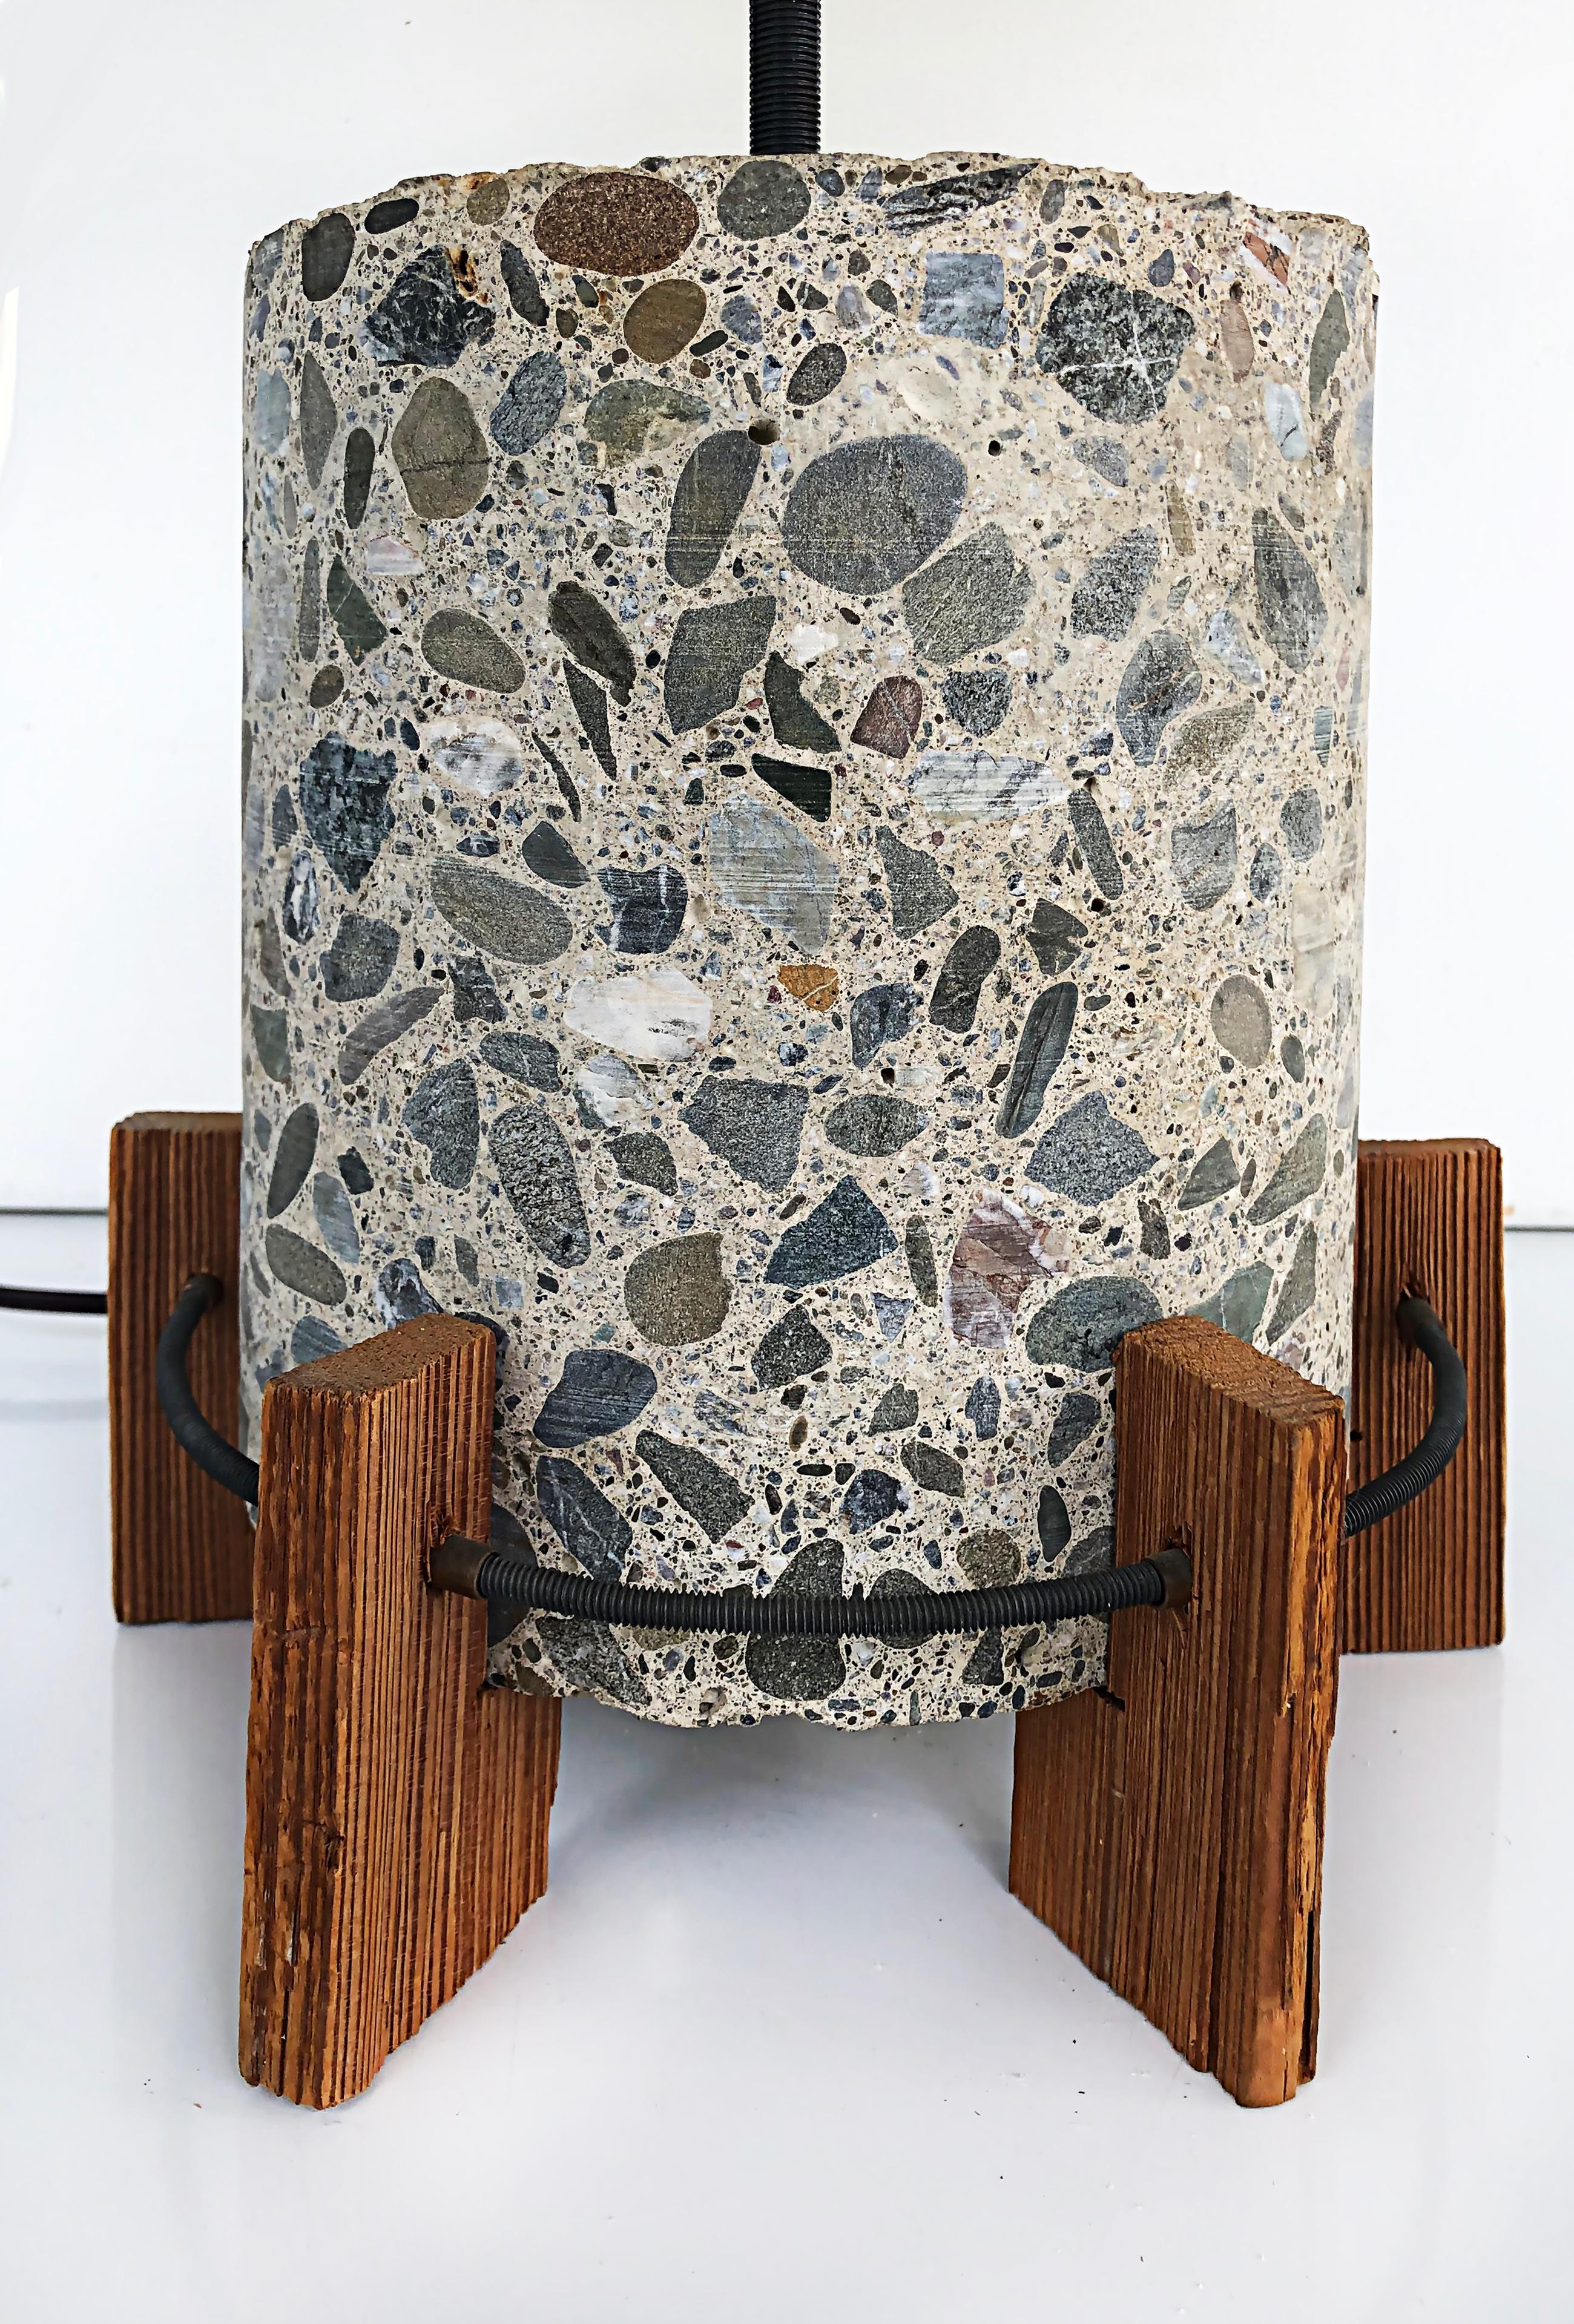 Vintage Richard Lee Parker Studio Terrazzo Wood Table Lamp, Signed 1992 In Good Condition For Sale In Miami, FL